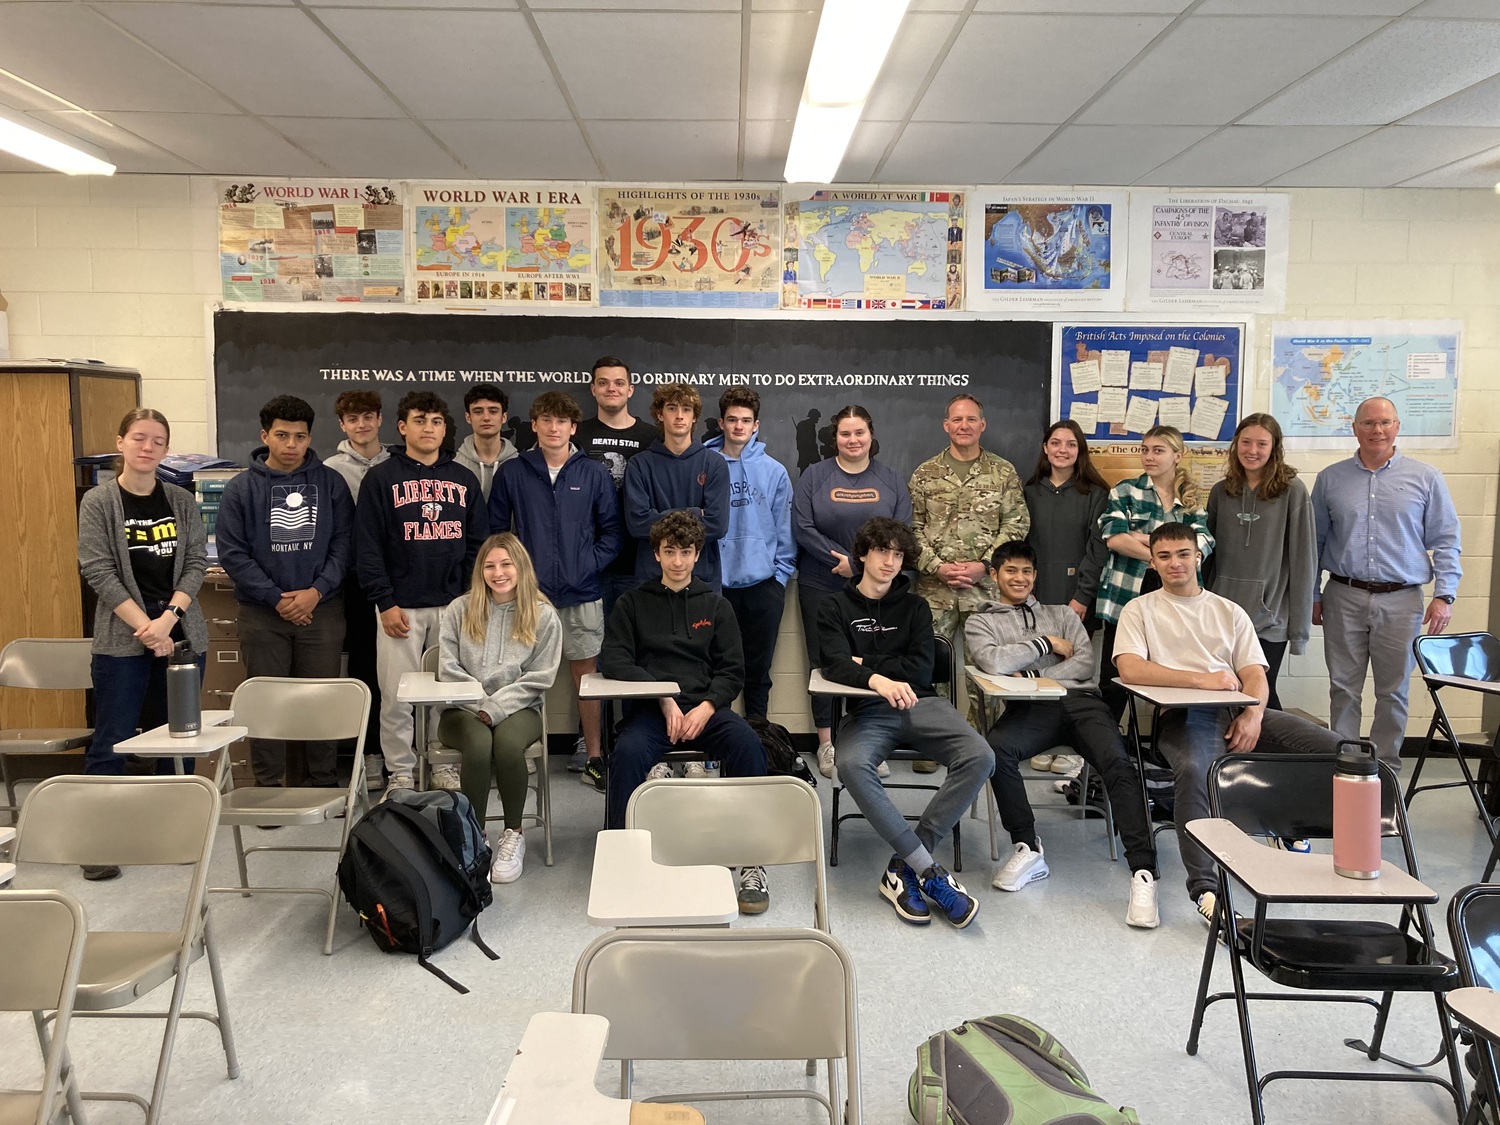 Chief Master Sergeant Brian Mosher of the 106 th Rescue Wing, recently spoke to Westhampton Beach High School History of Long Island students in Korey Williams’ class. The presentation focused on the rescue Xapabilities of the Rescue Wing in both peacetime and armed conflict, as well as the Role of the 106th Rescue Wing on Long Island. The discussion was the culmination of a unit on the history of aviation on Long Island.
COURTESY WESTHAMPTON BEACH SCHOOL DISTRICT